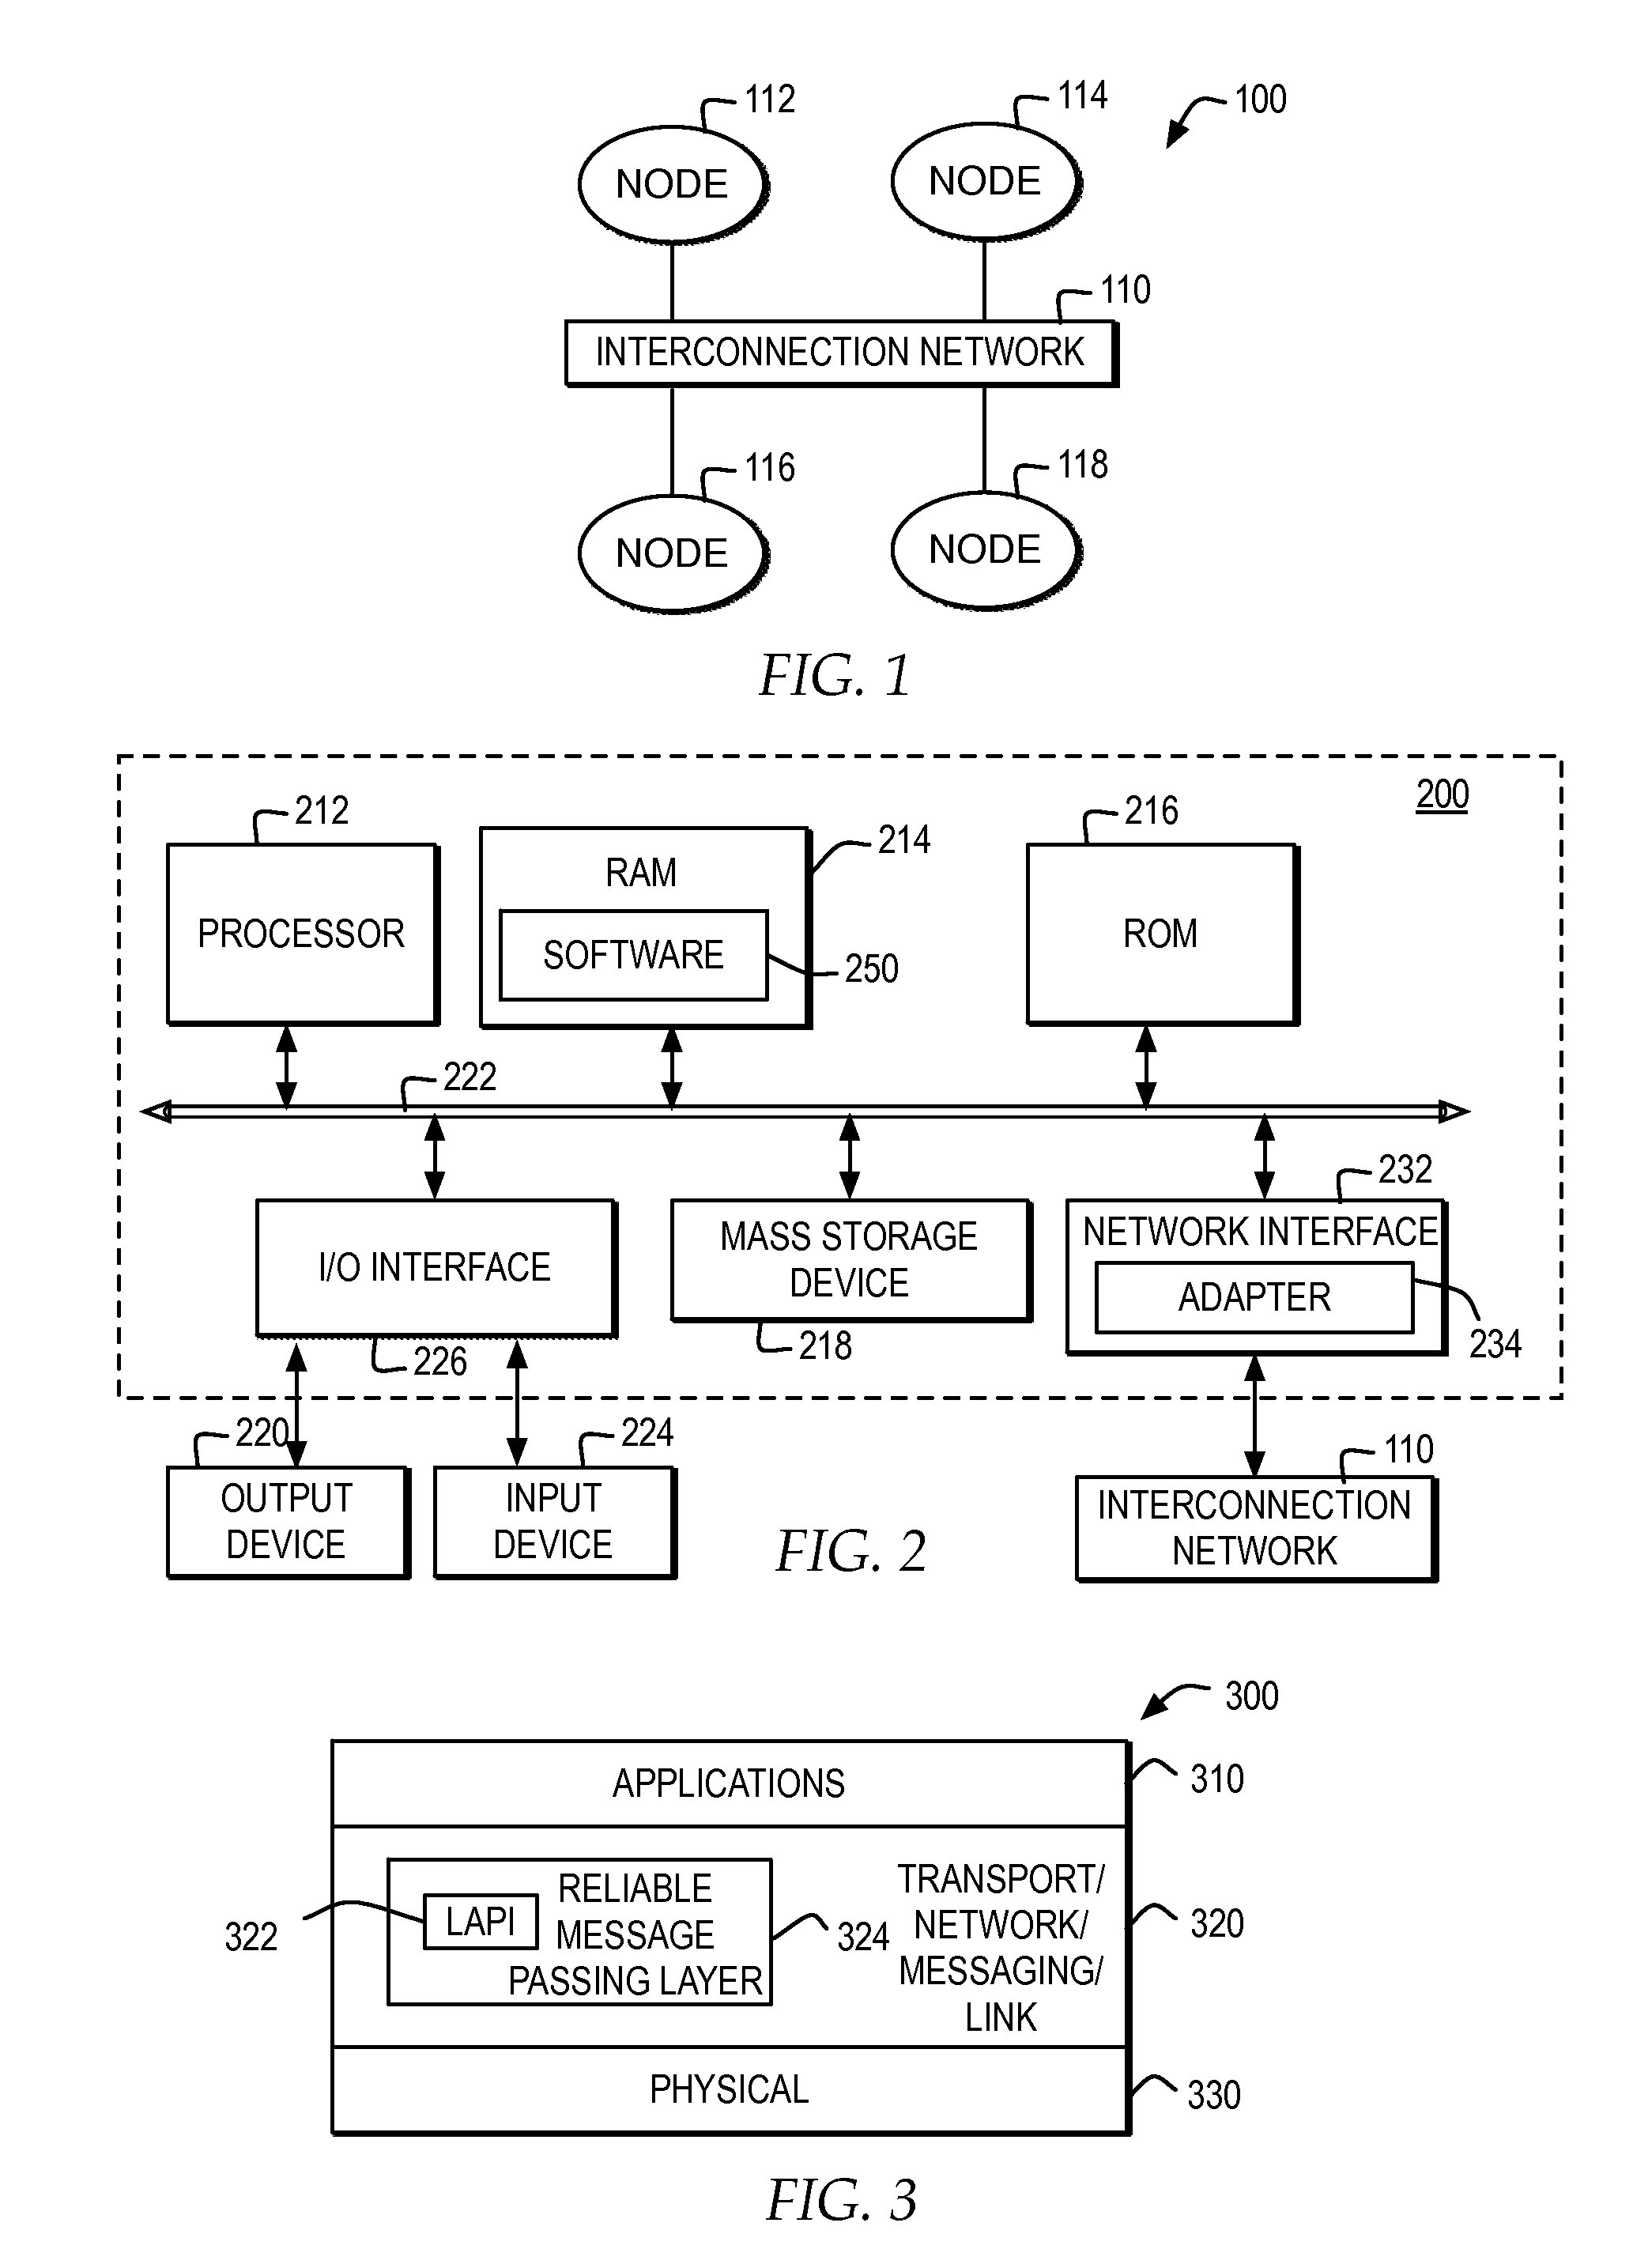 Flow control for reliable message passing